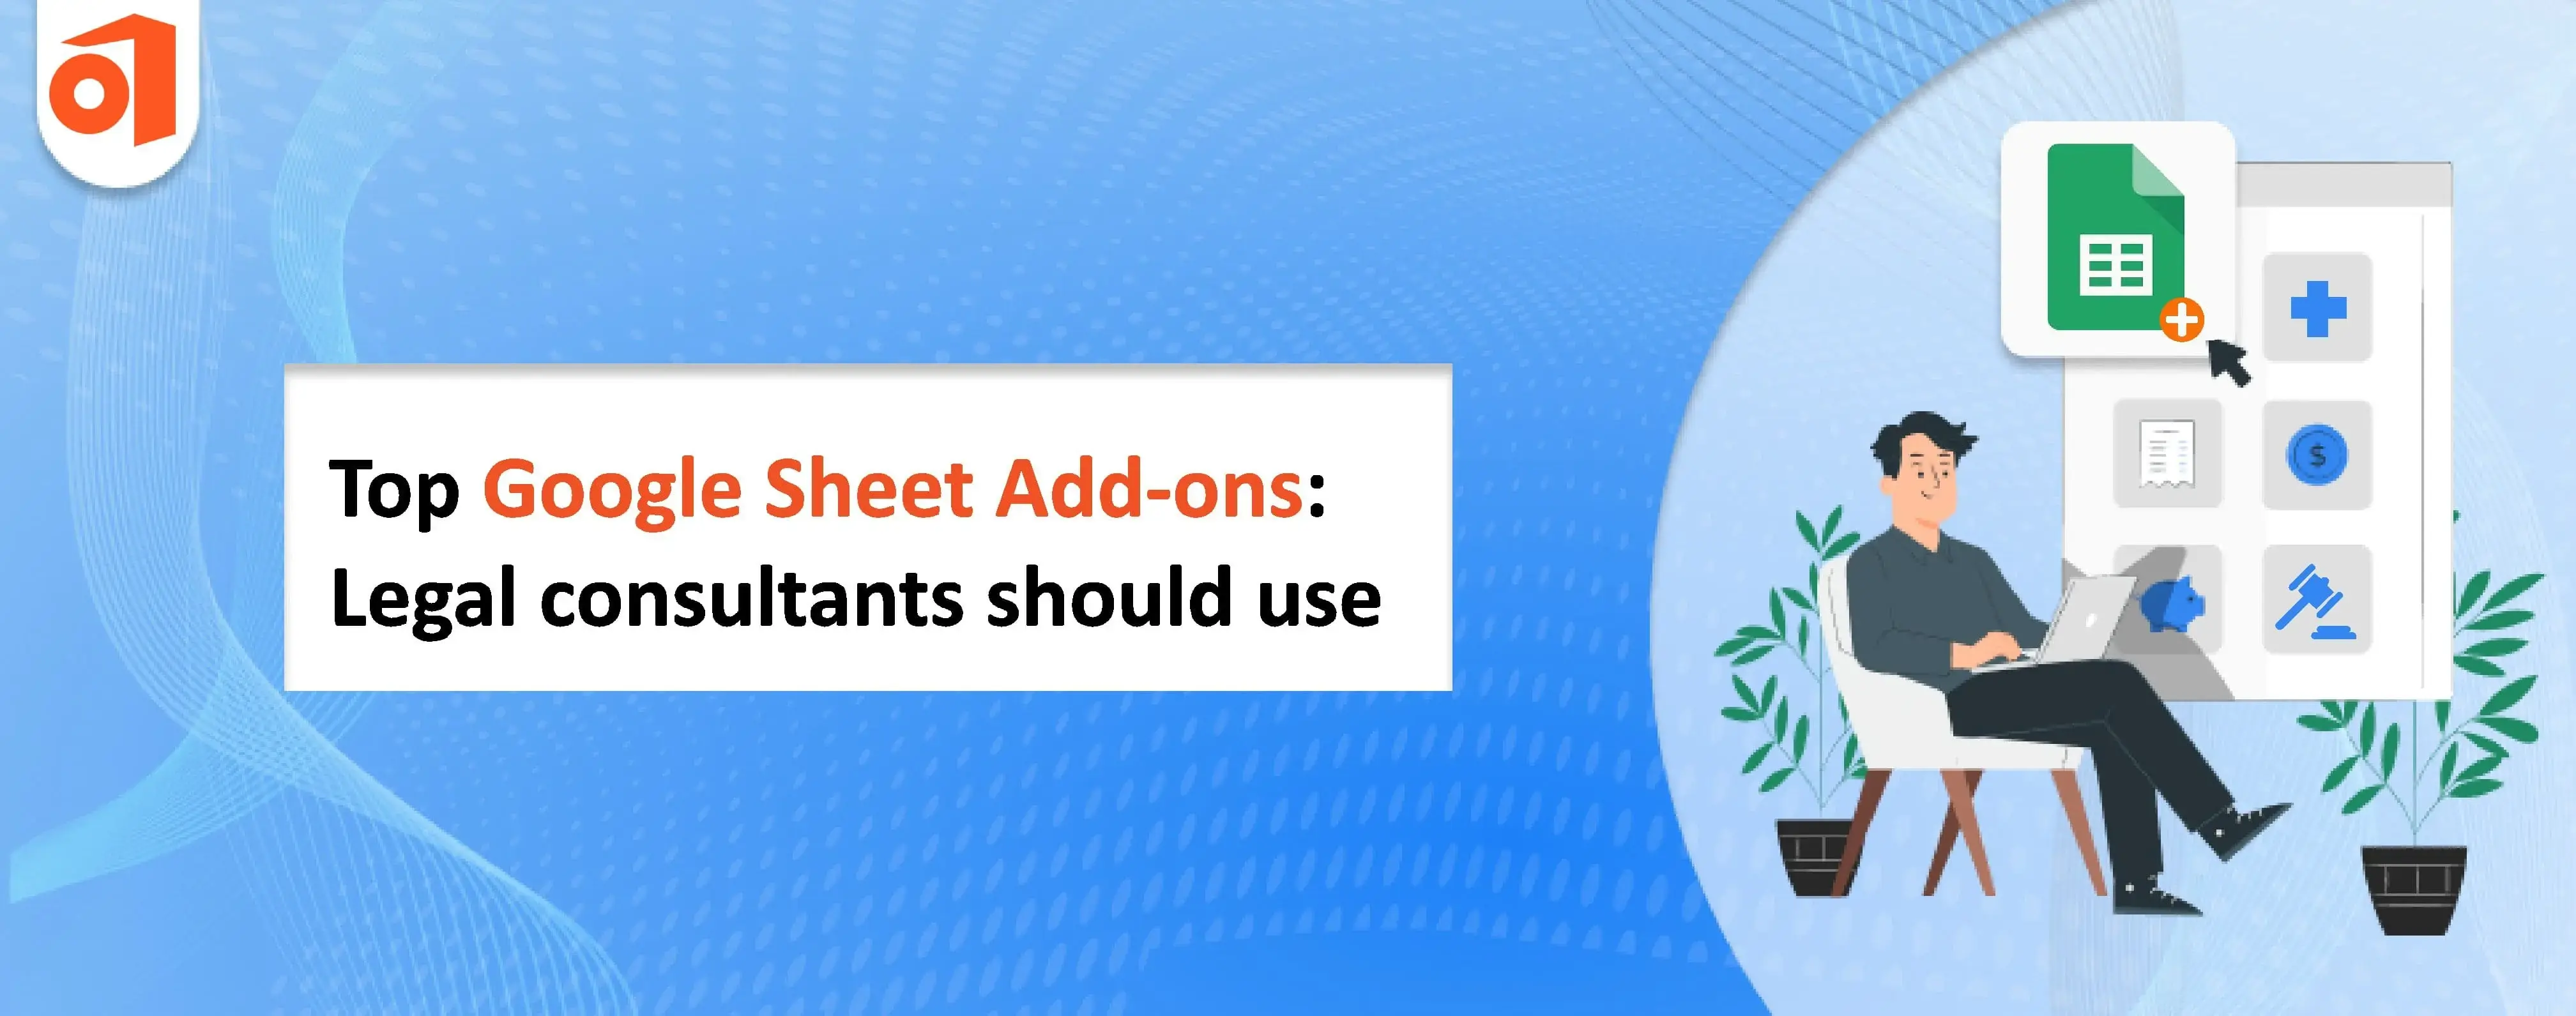 Top 15 Google Sheet Add-ons for Legal Consultants -icon